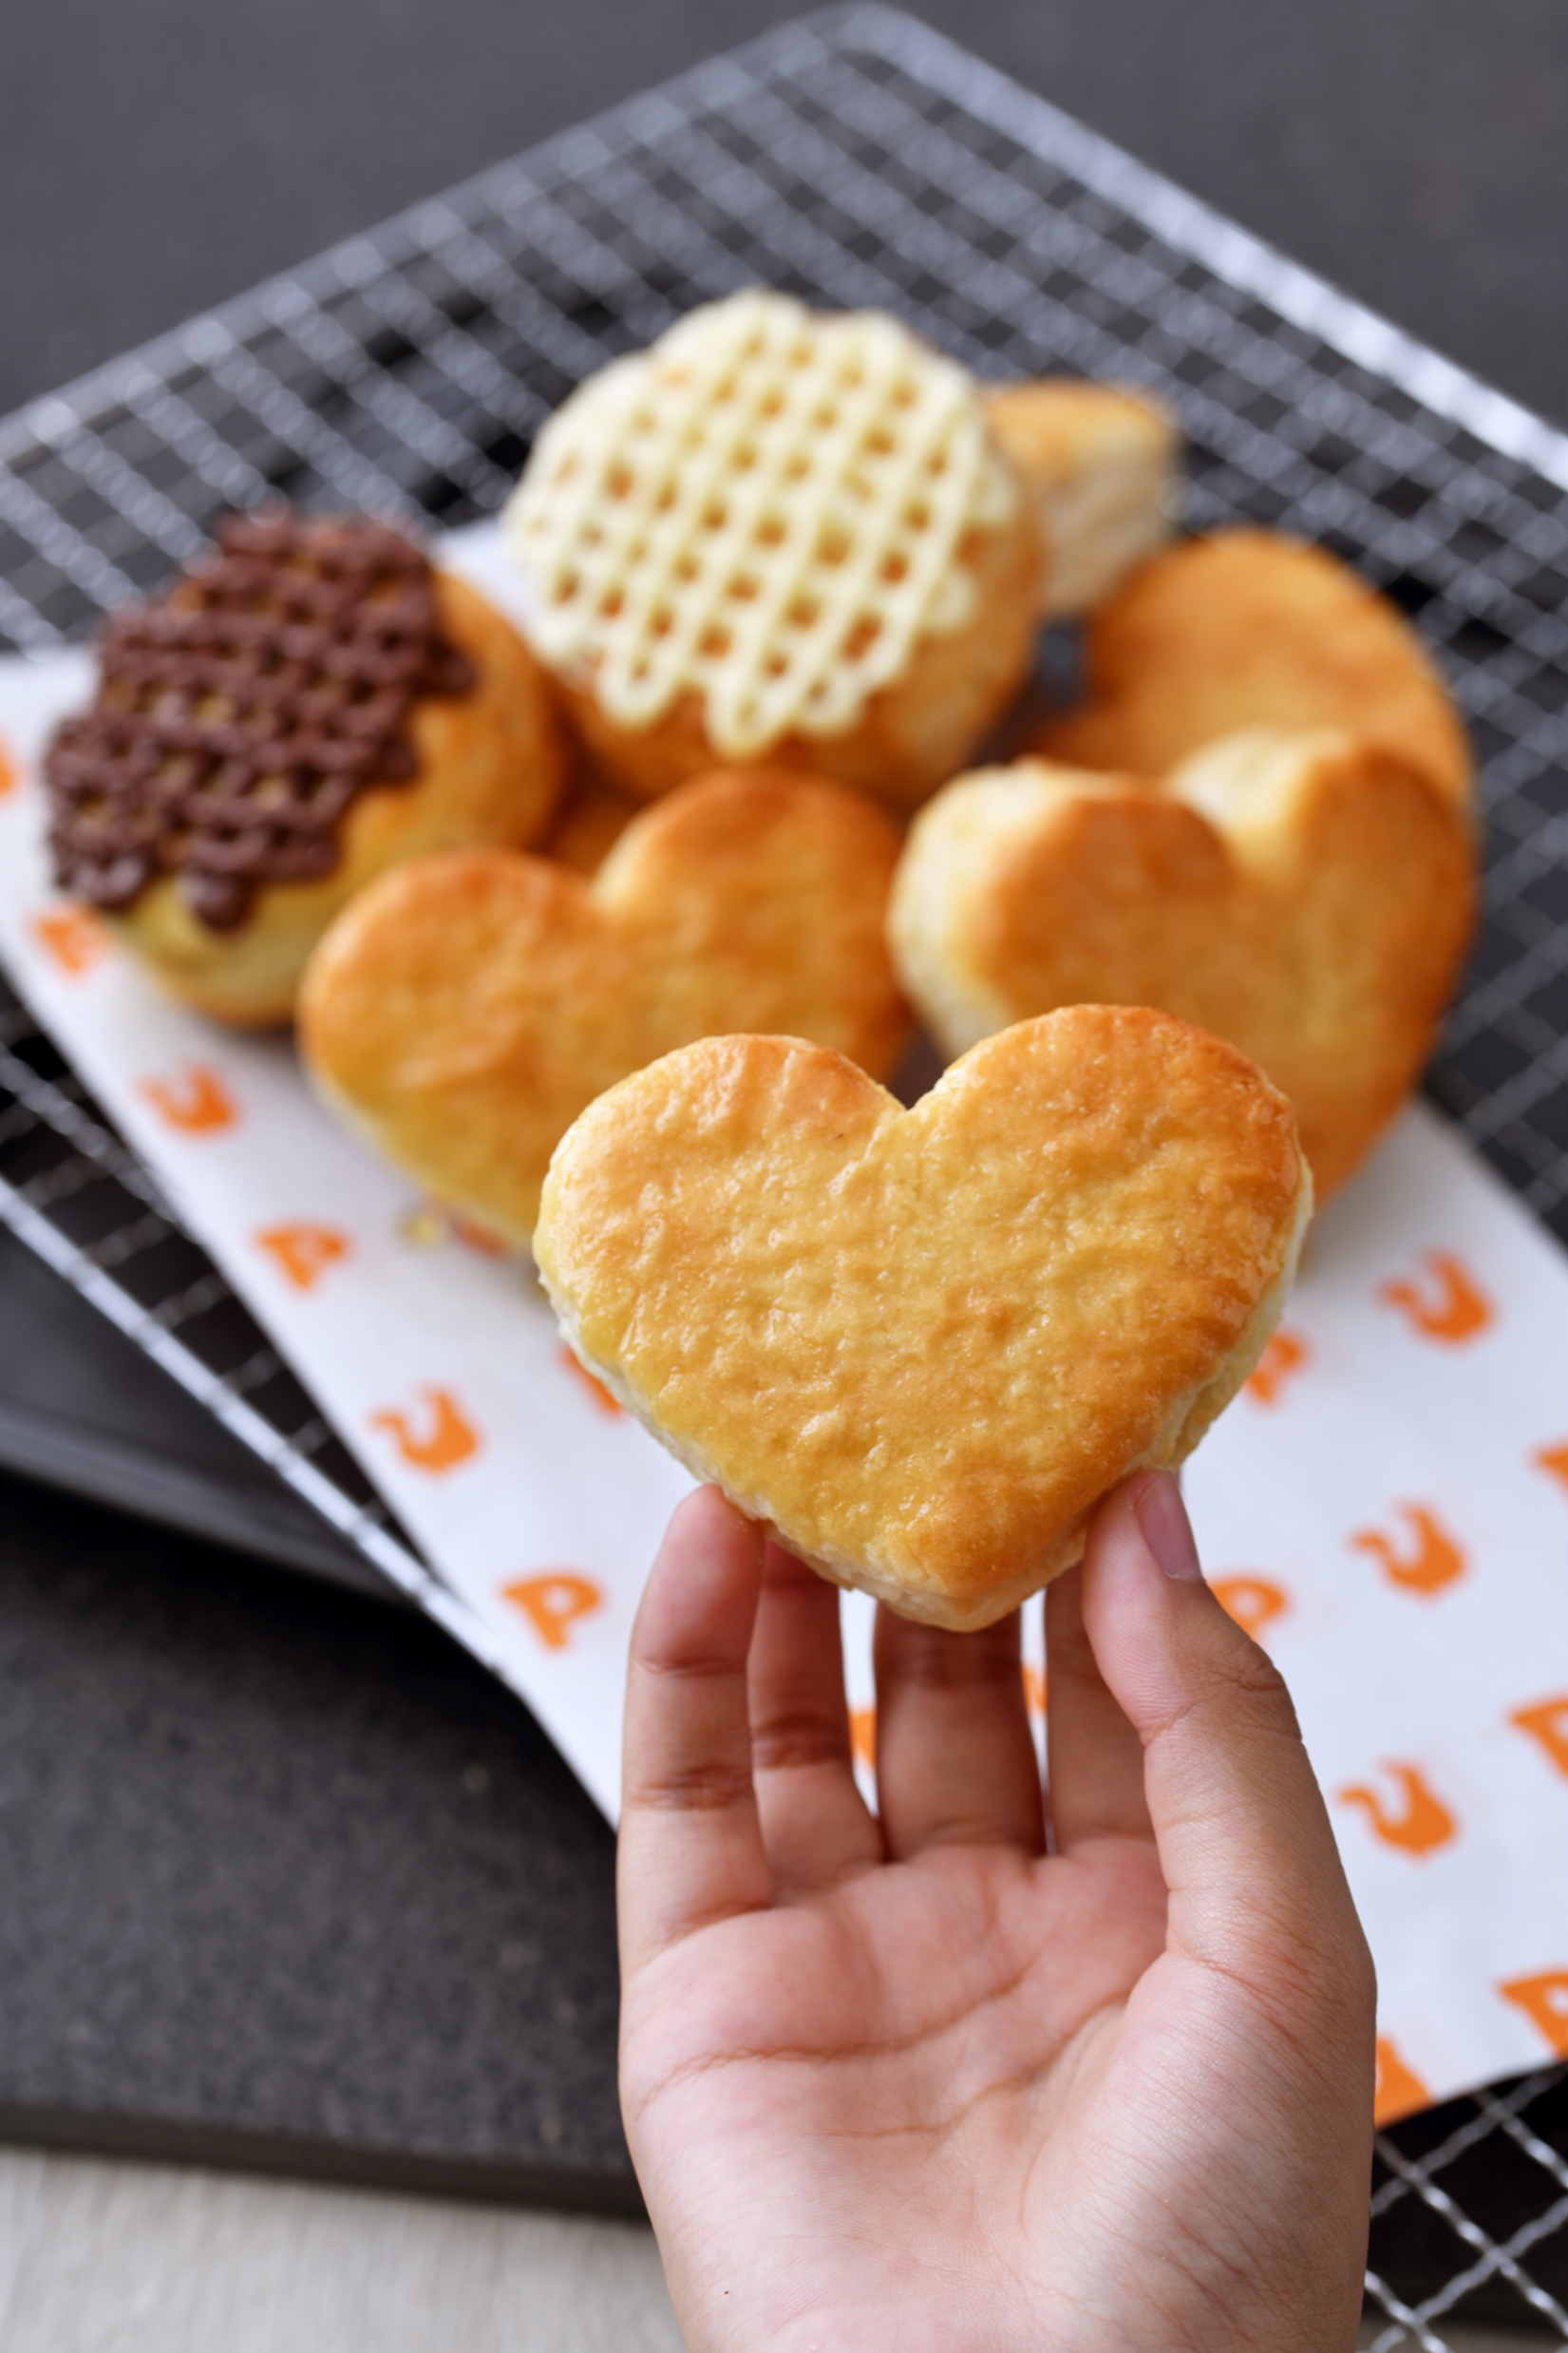 spread-the-love-with-popeyes-heart-biscuits-orange-magazine